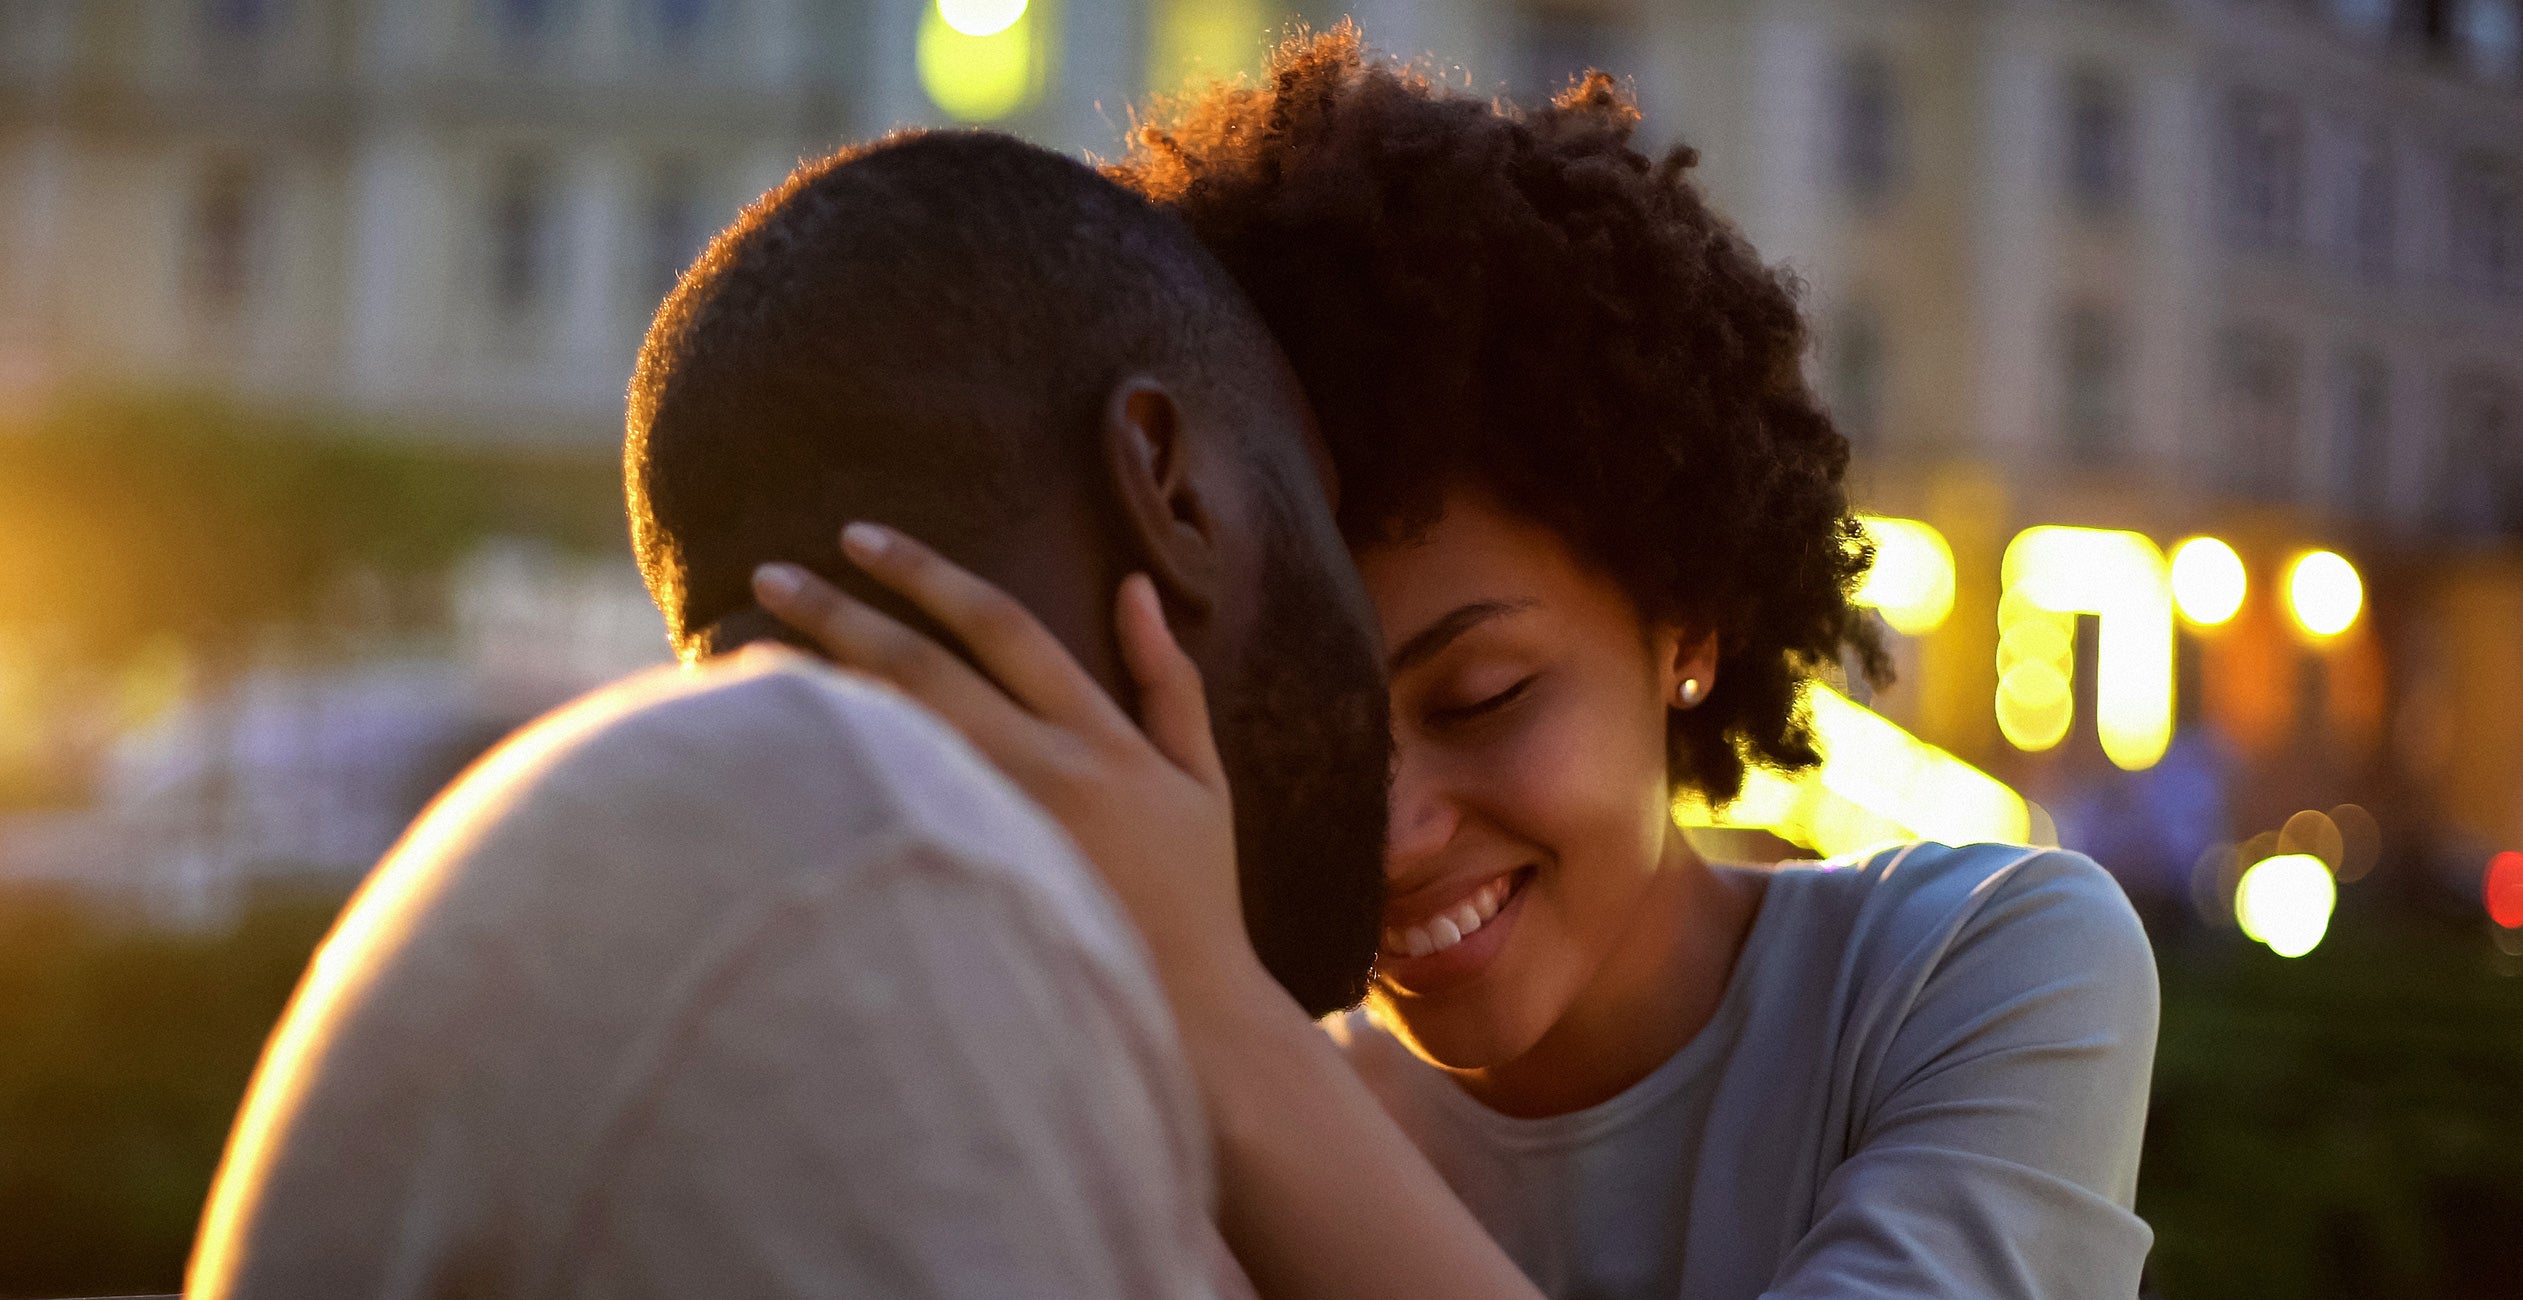 Where Is The Black Love? Best Cities and Top Dating